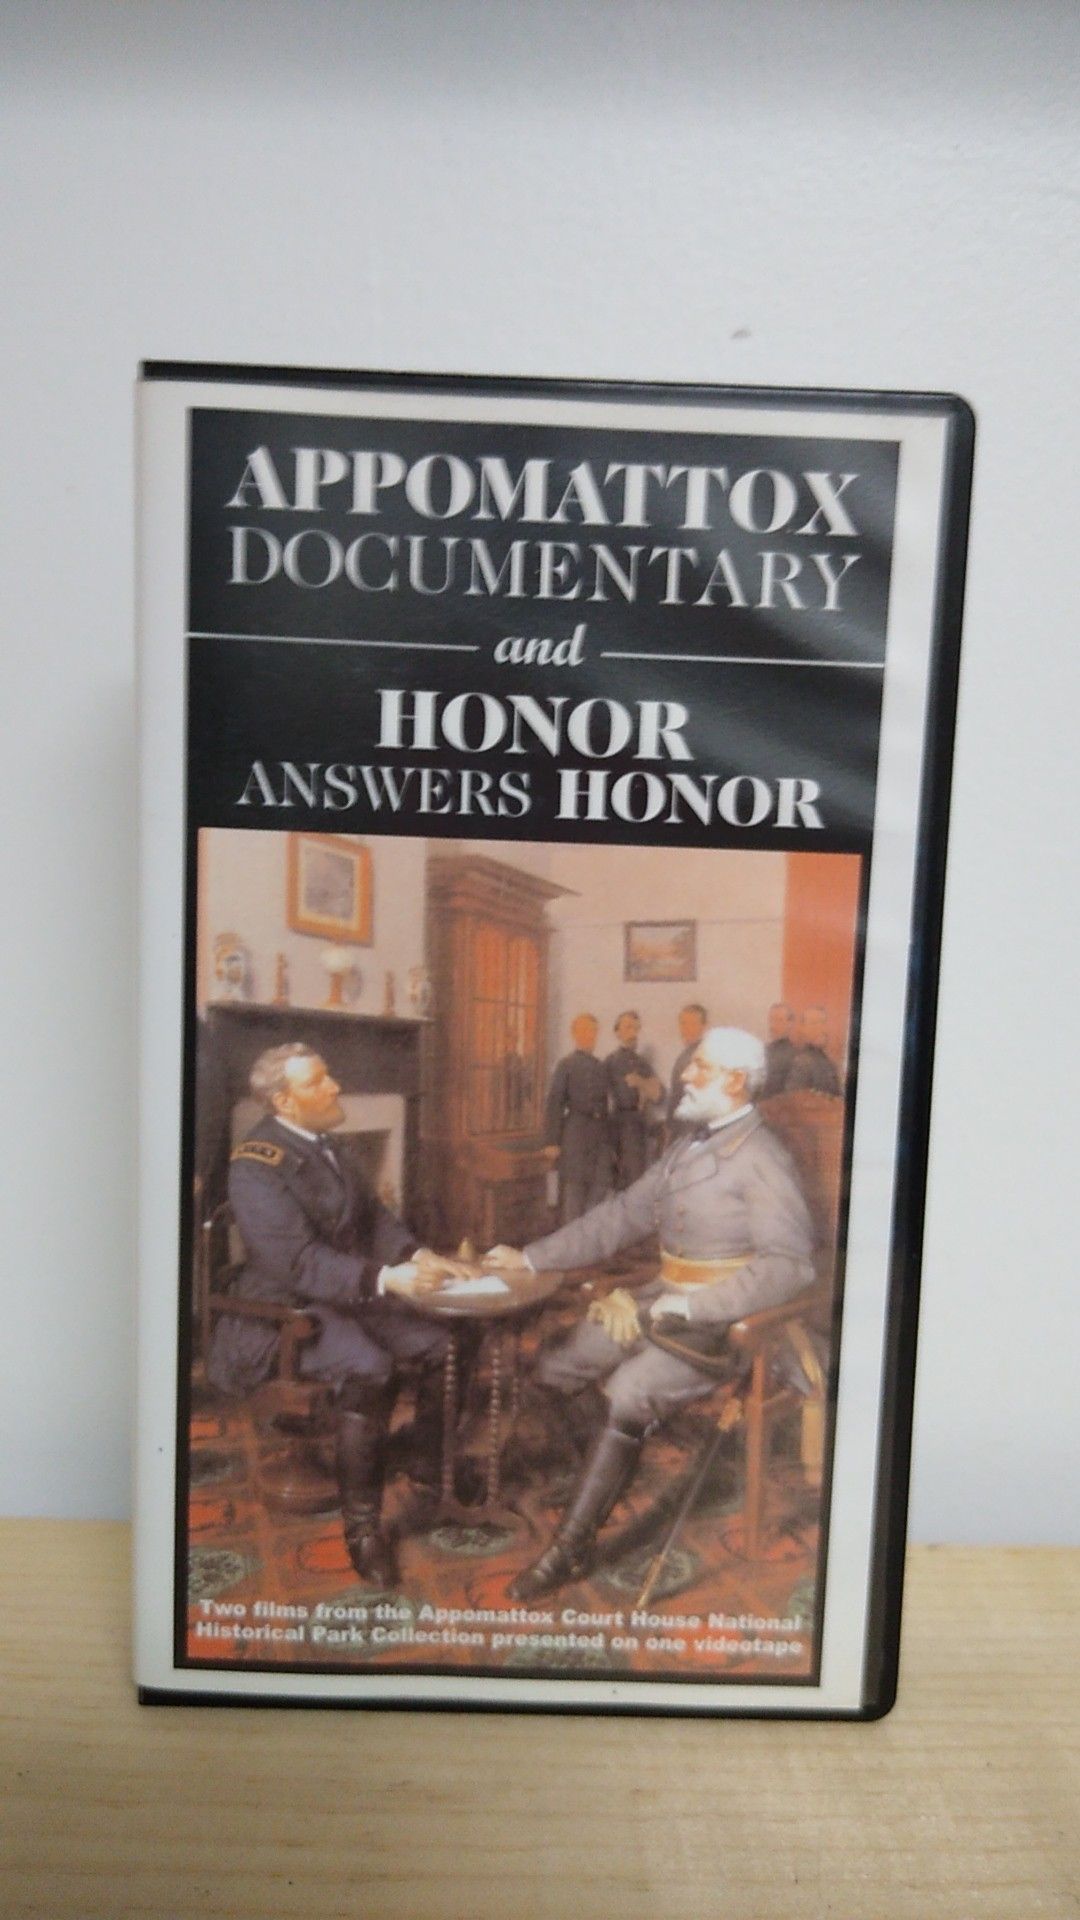 Appomattox Documentary and Honor Answers Honor